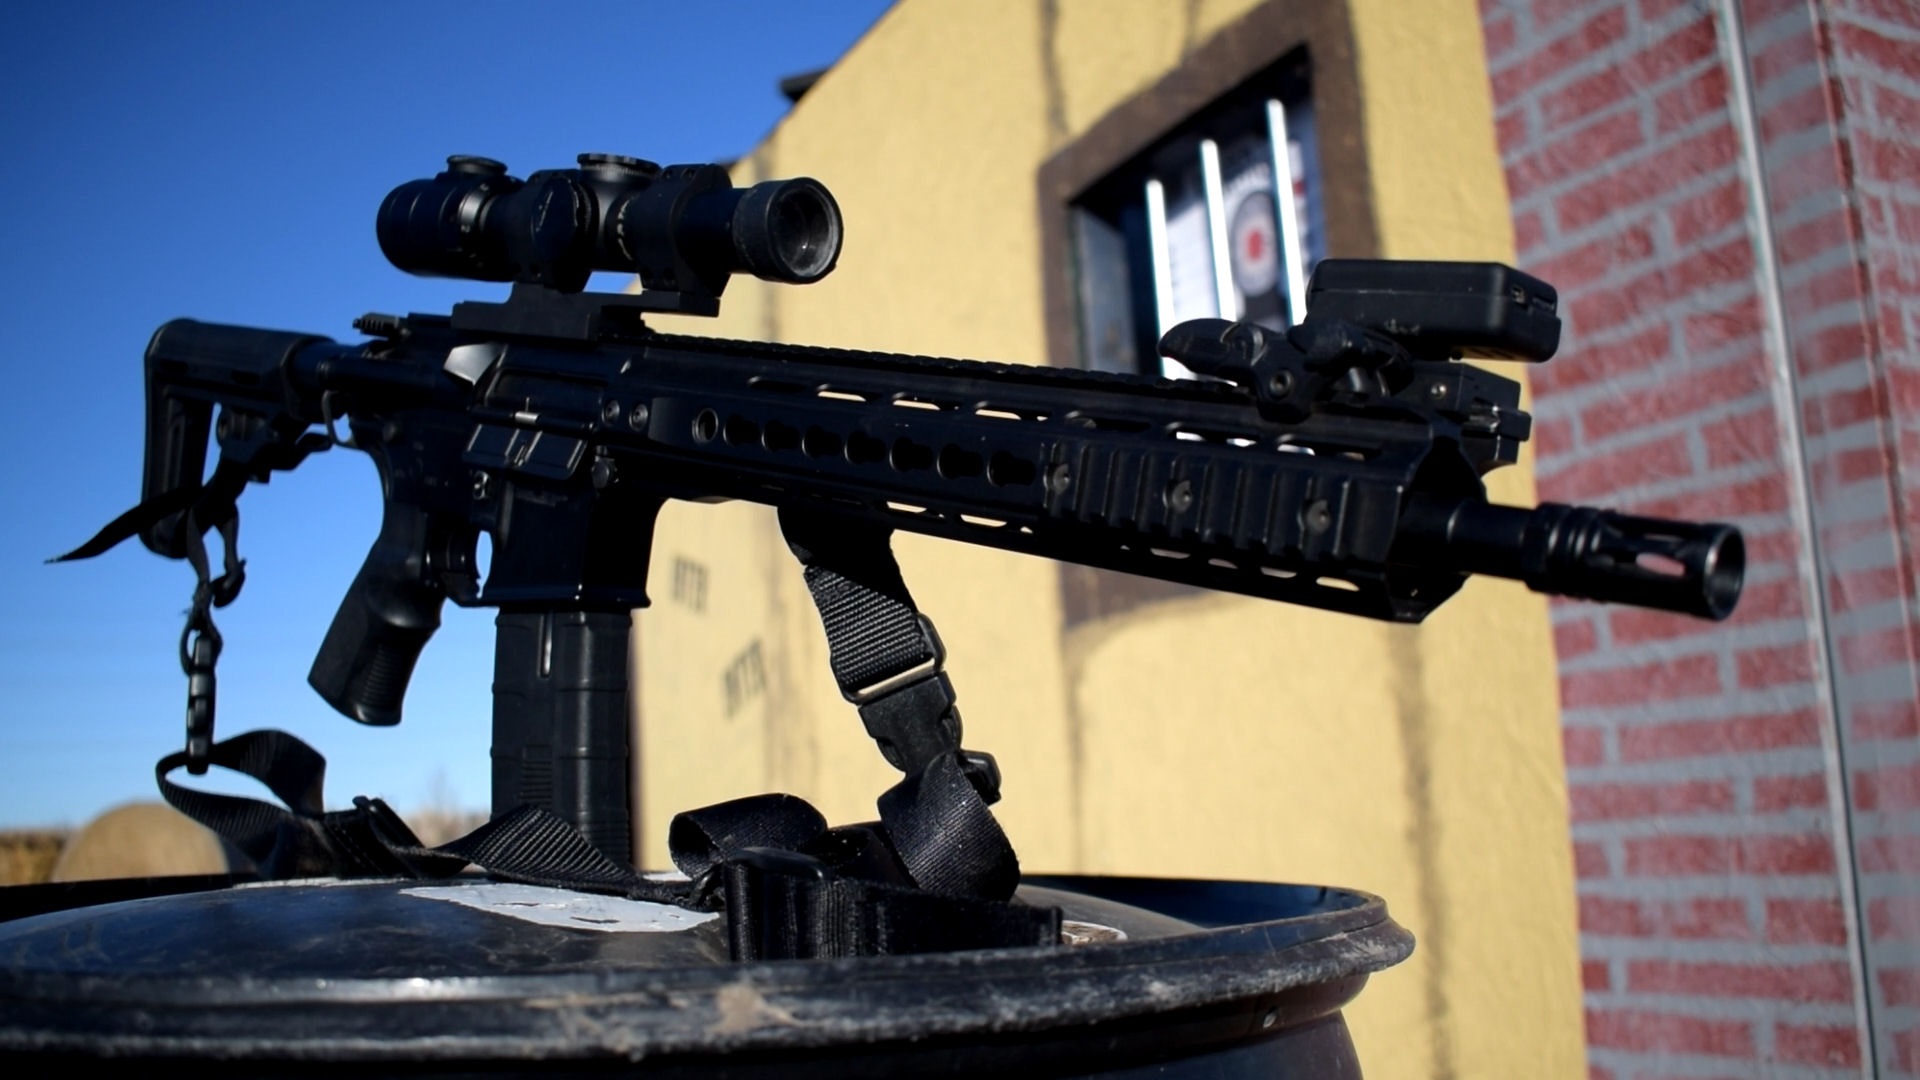 An airsoft rifle with a scope mounted on a stand, against the backdrop of a building with a brick wall design.